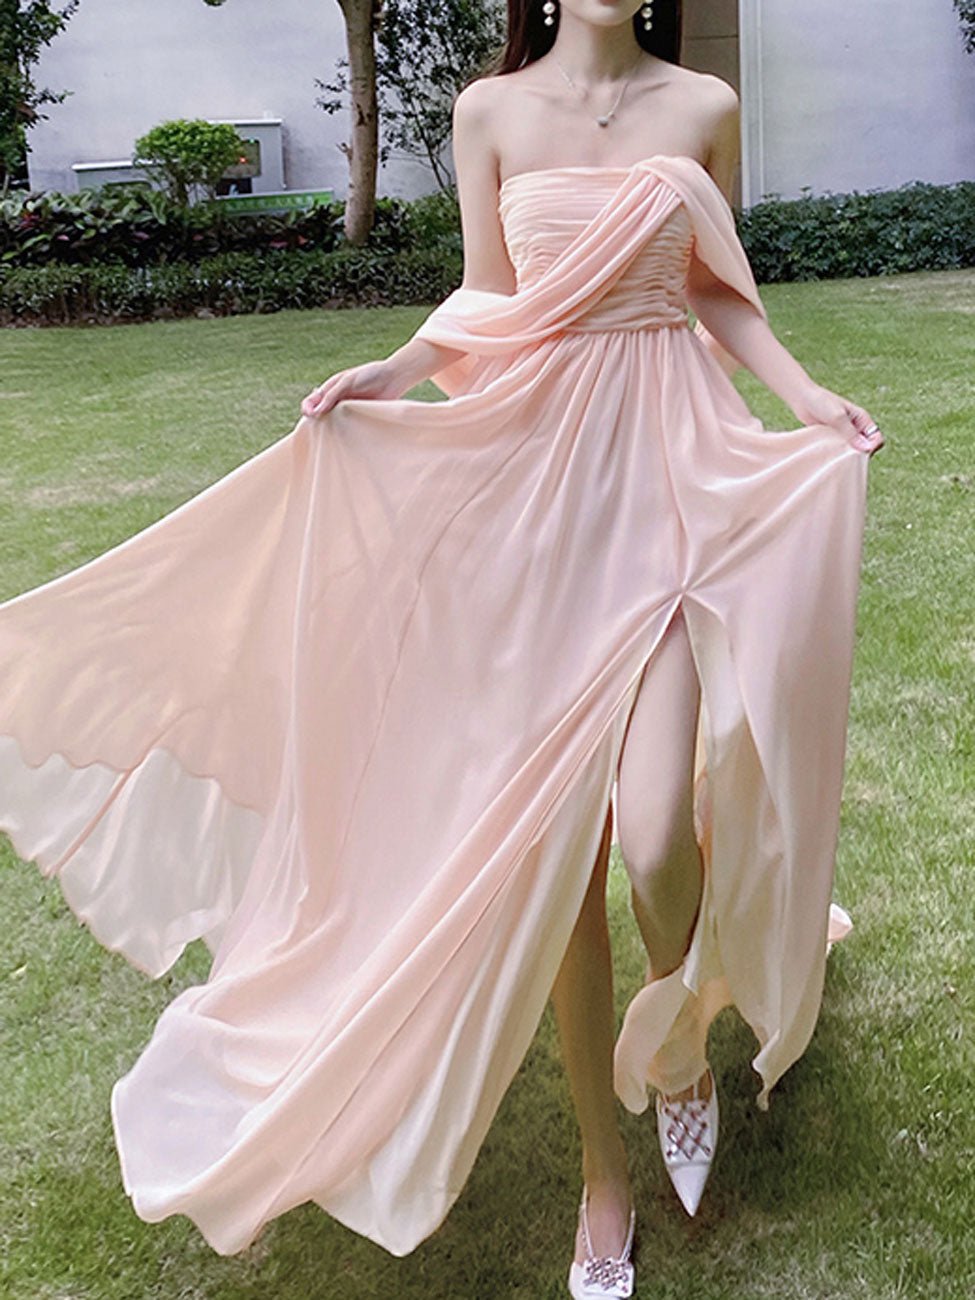 Pink Chiffon Long Prom Dresses, Pink Formal Evening Party Dress